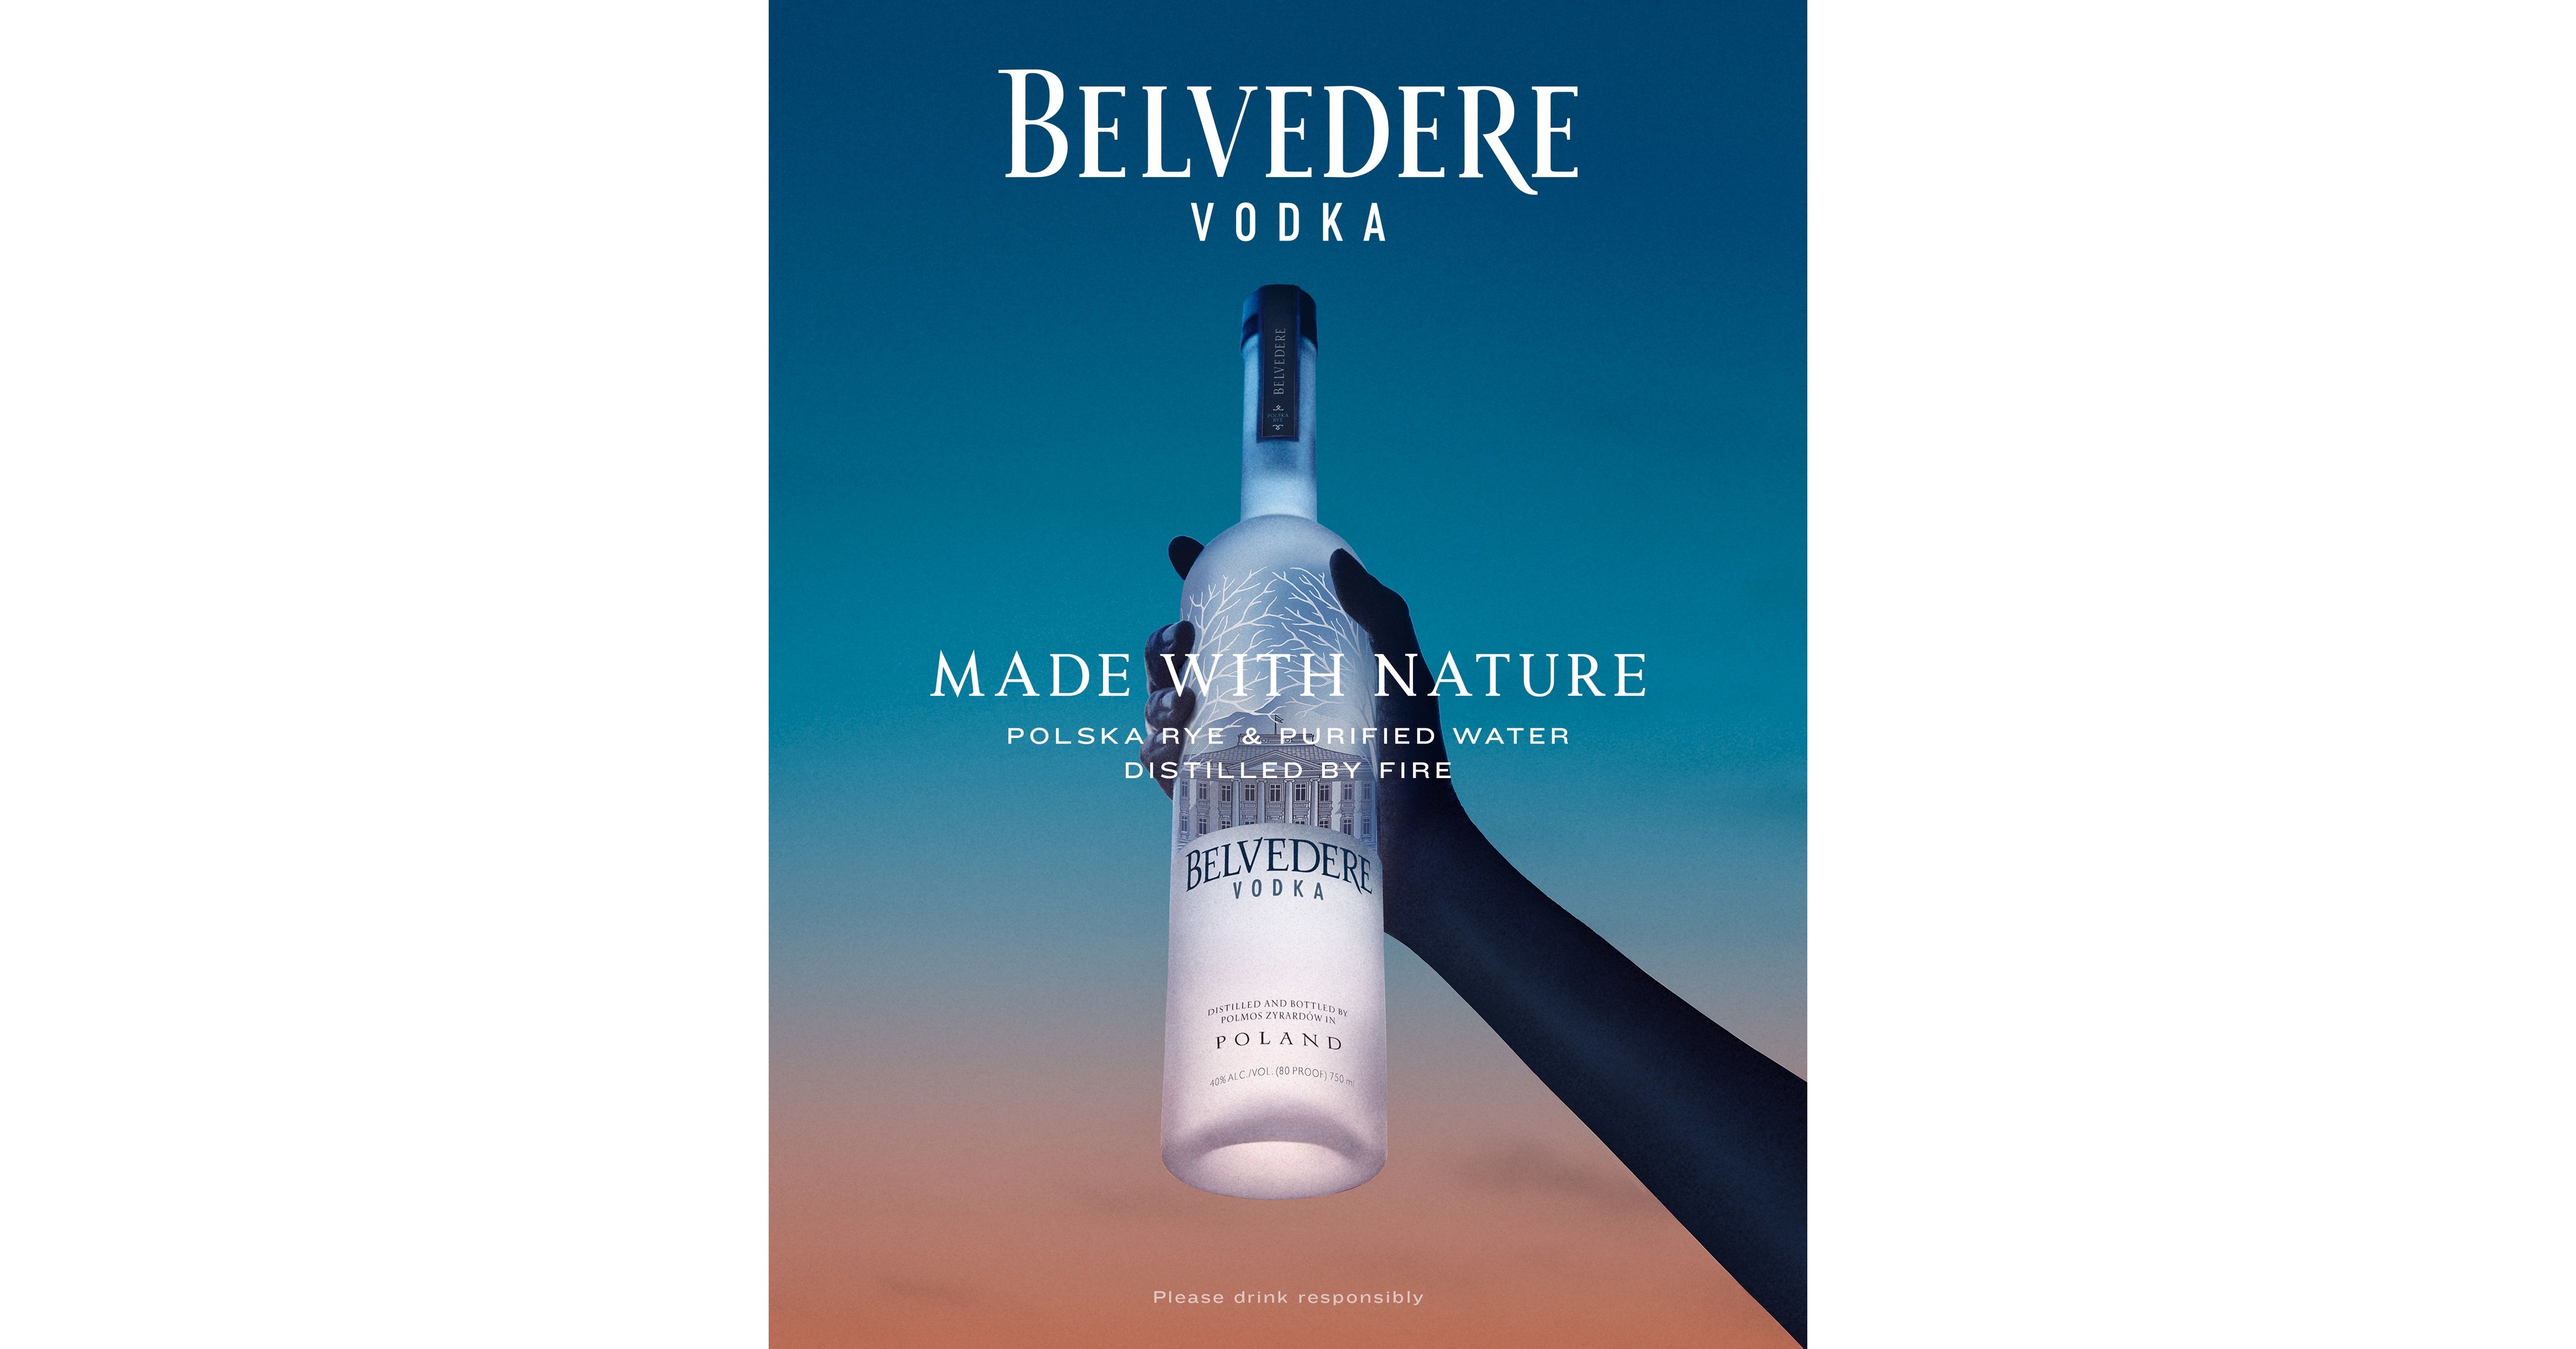 This Belvedere Vodka came with a built-in light in the base of the